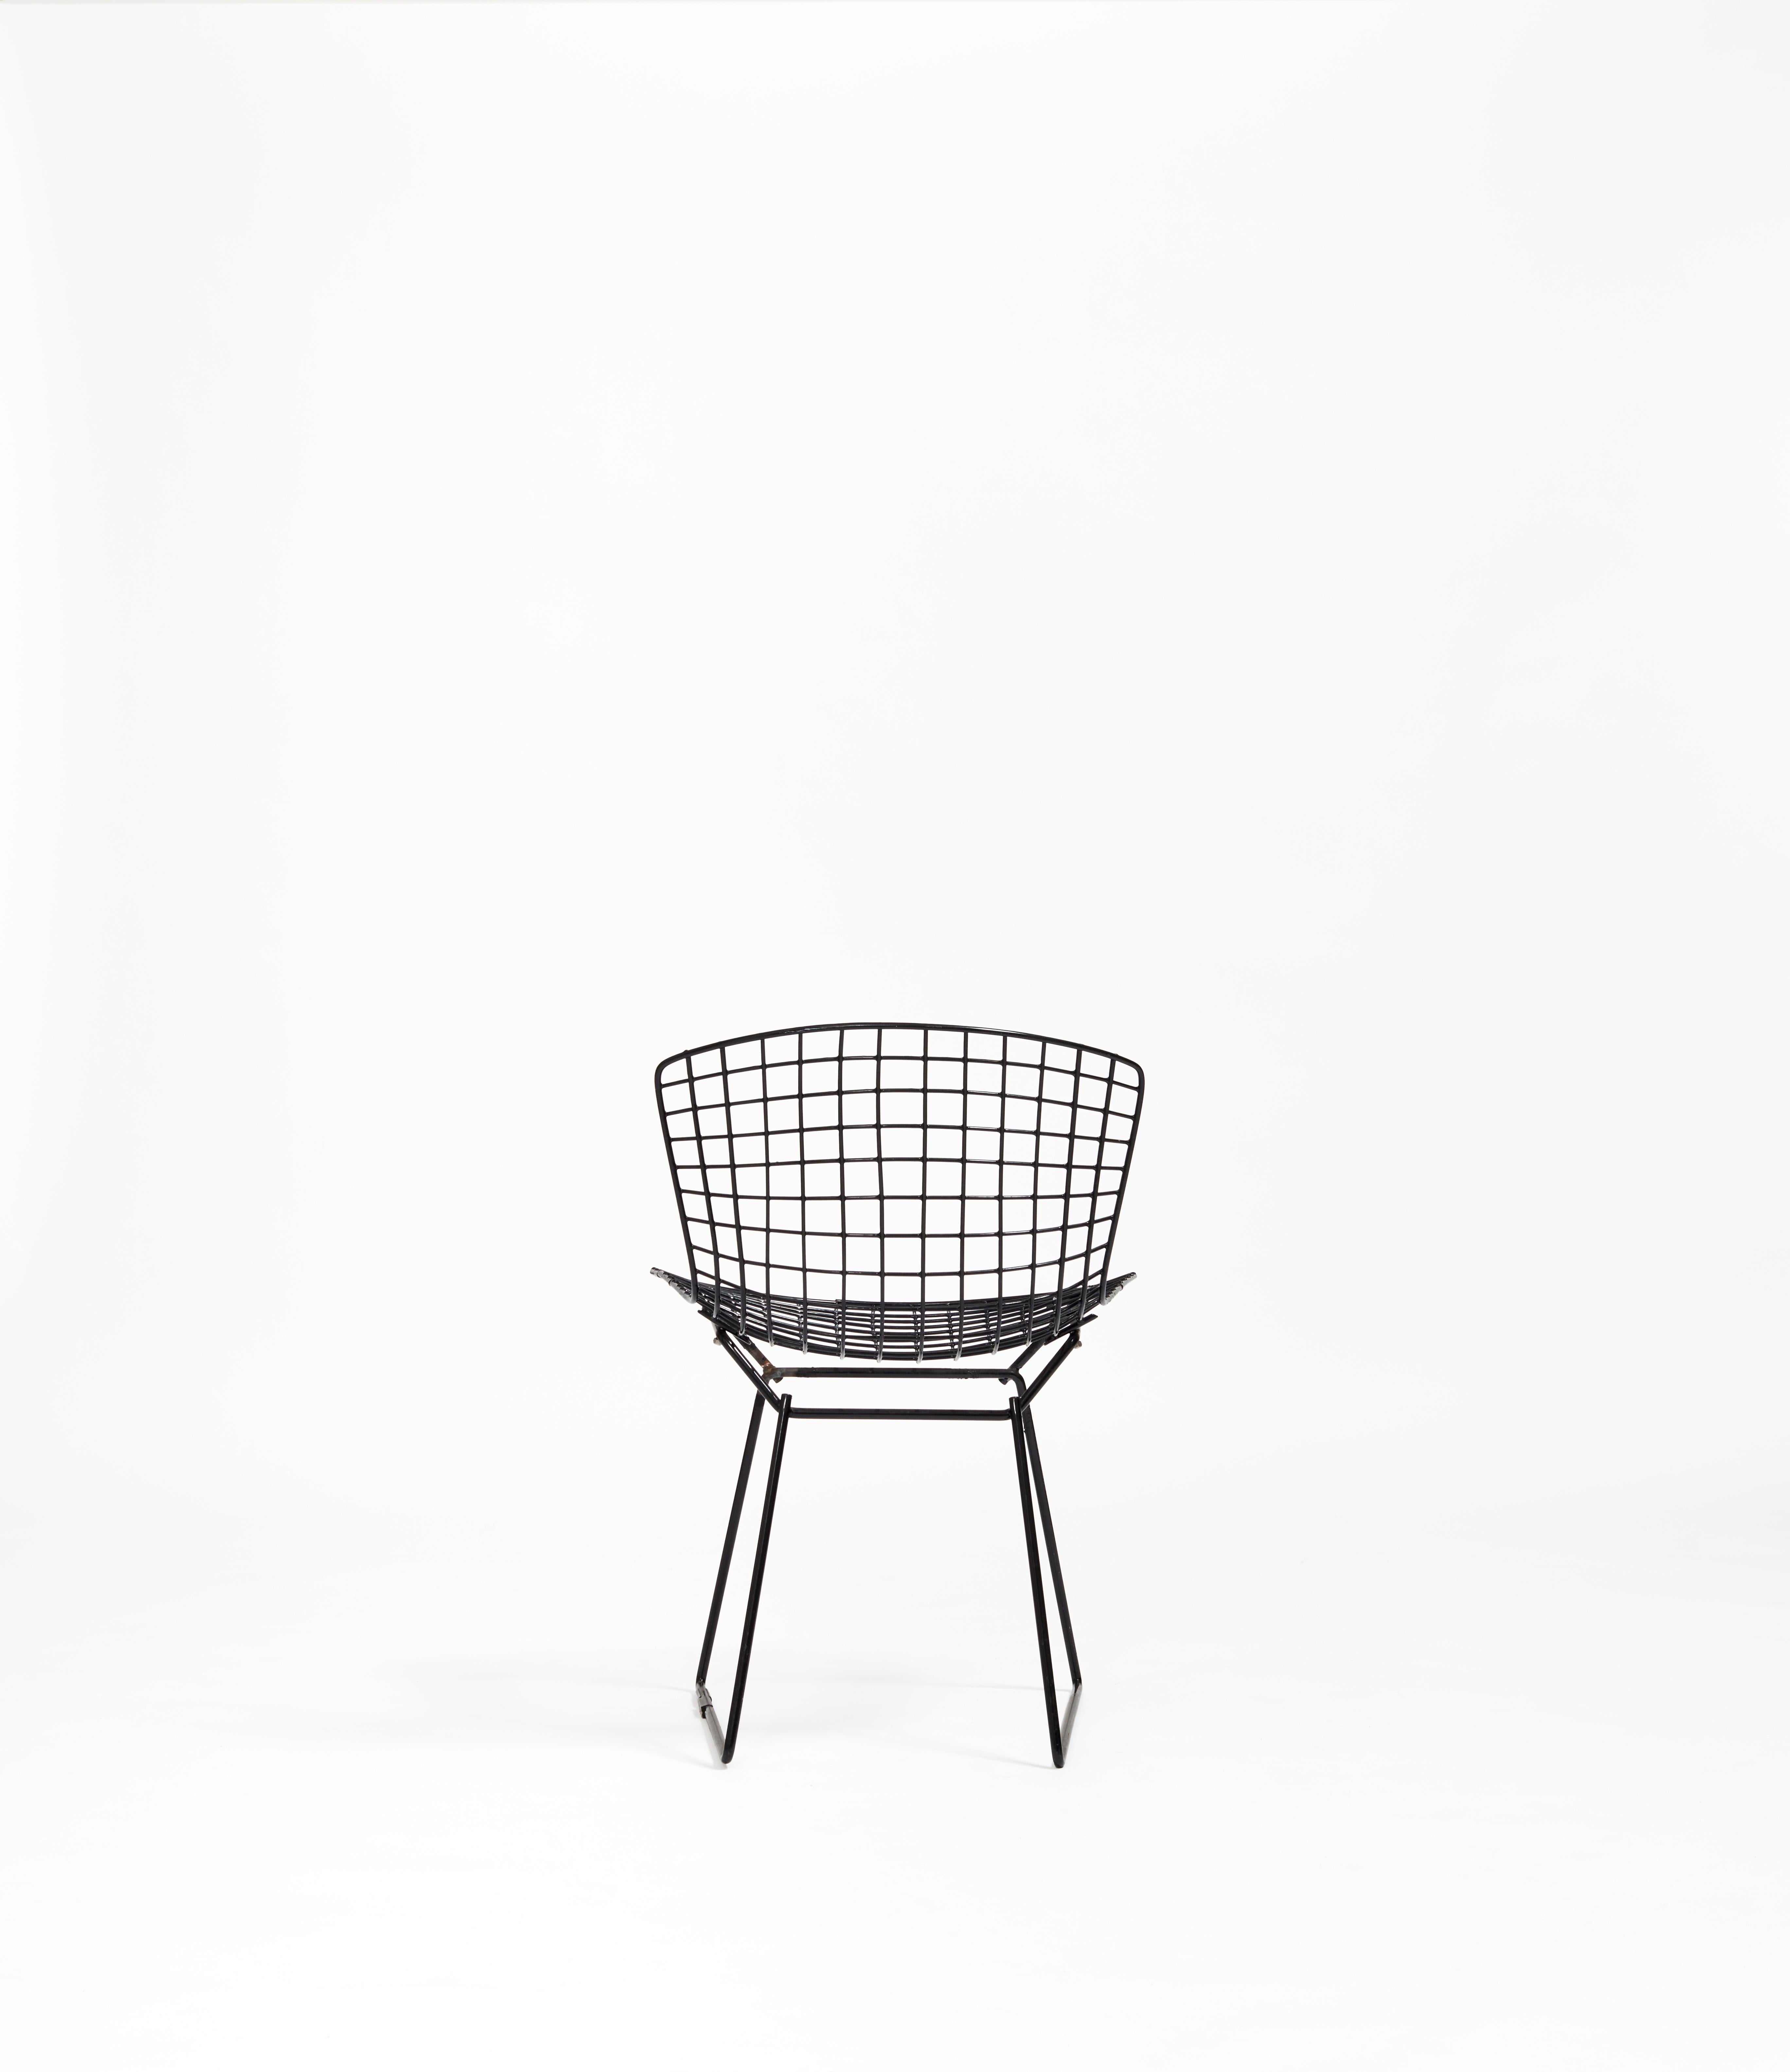 Bertoia’s side chair is a definitively iconic expression of mid-century sensibility with a particular emphasis on the relationship between aesthetics and durability. Its silhouette is the initial iteration for a style that would become commercially